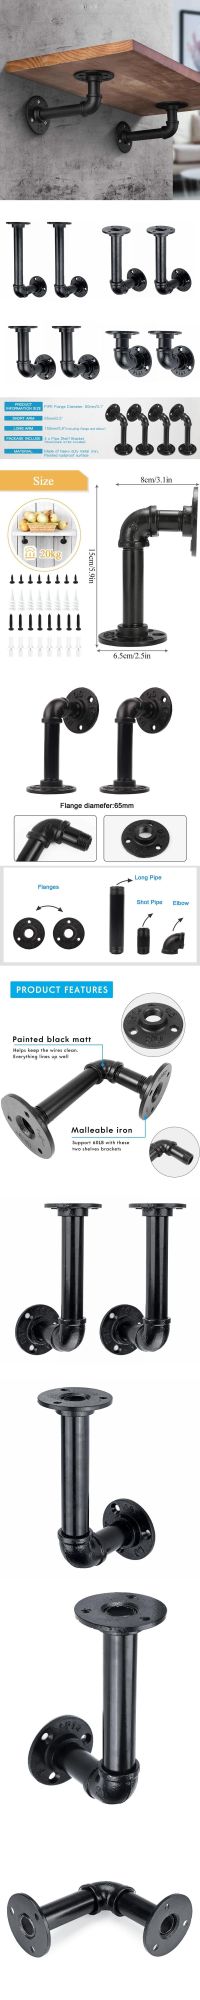 Bsp Threaded Elbow Pipes Flange Malleable Iron Home Furniture DIY Black Pipe Brackets